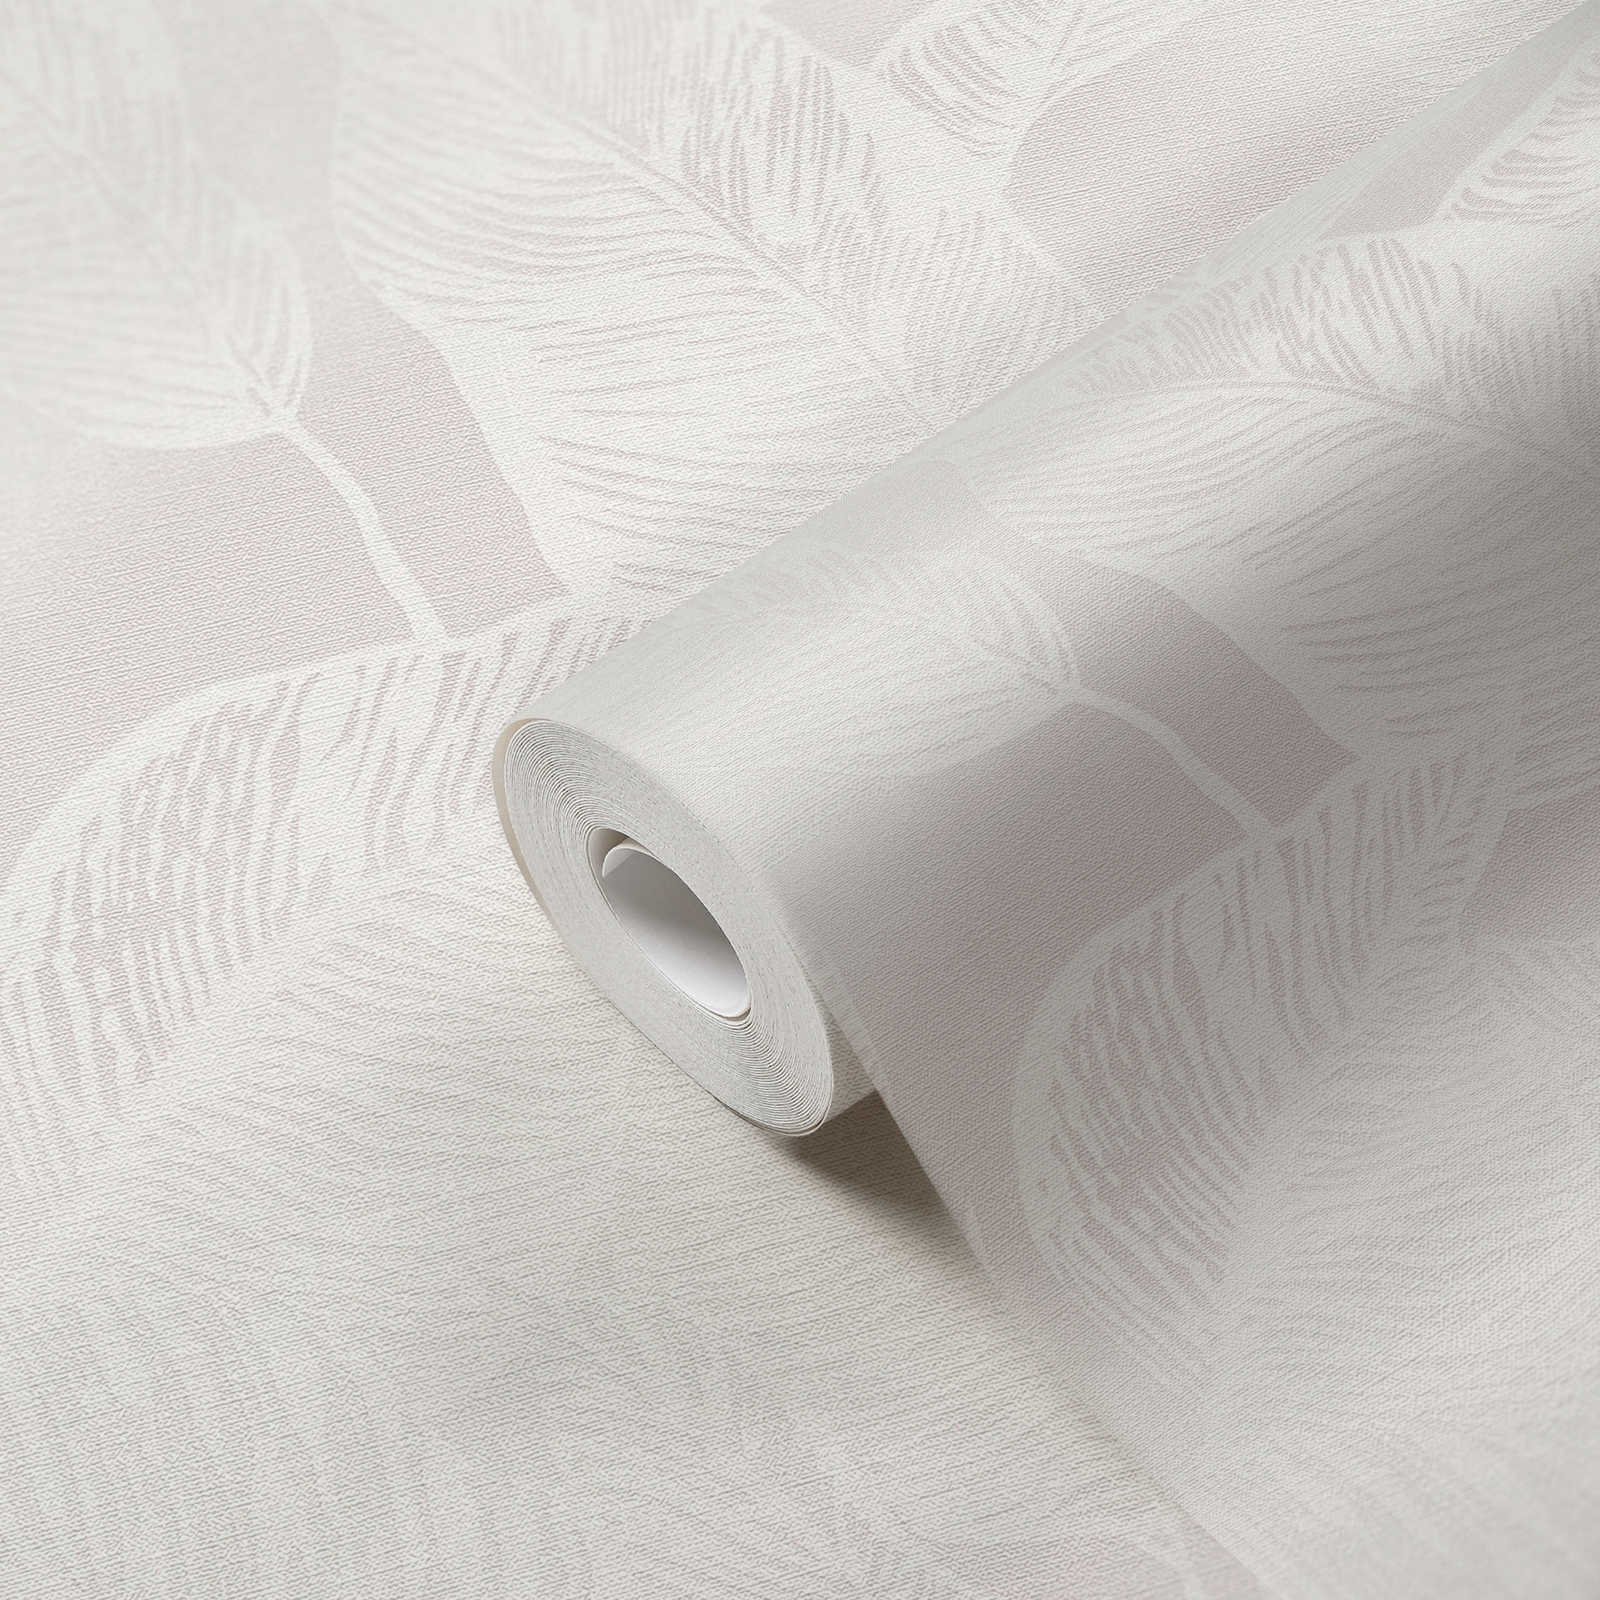             Non-woven wallpaper with leaves PVC-free - white, grey
        